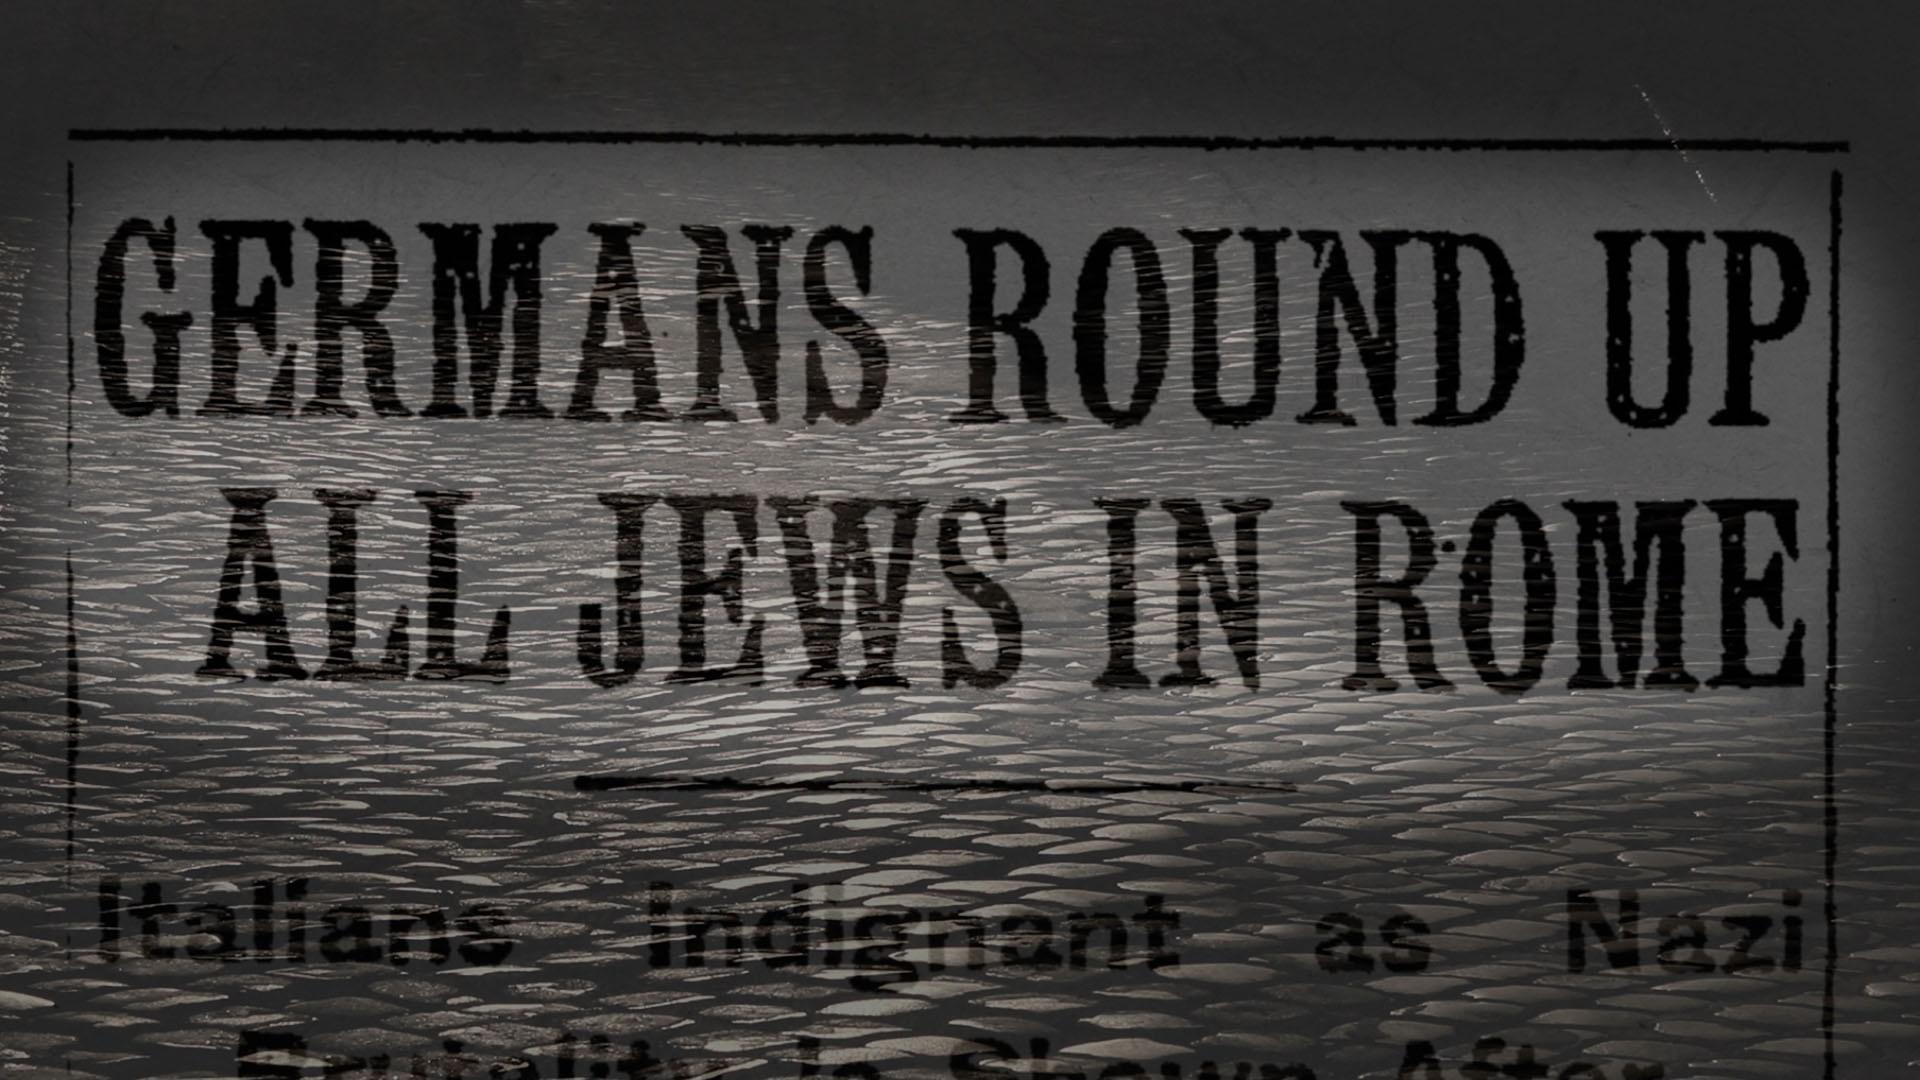 An image of a newspaper headline, announcing the Nazi roundup of Jews.